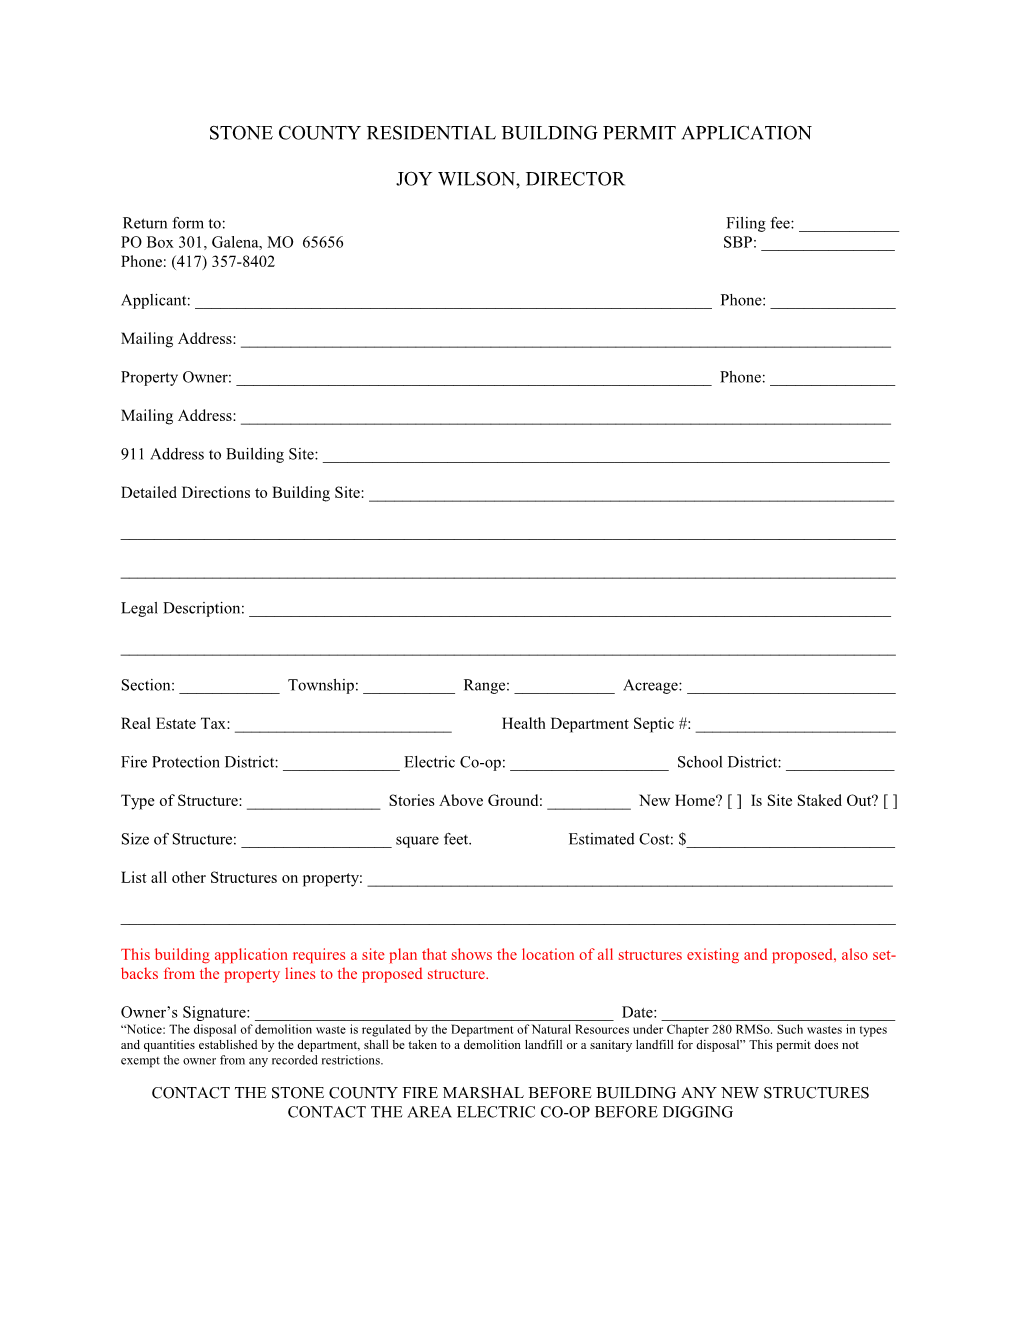 Stone County Residential Building Permit Application